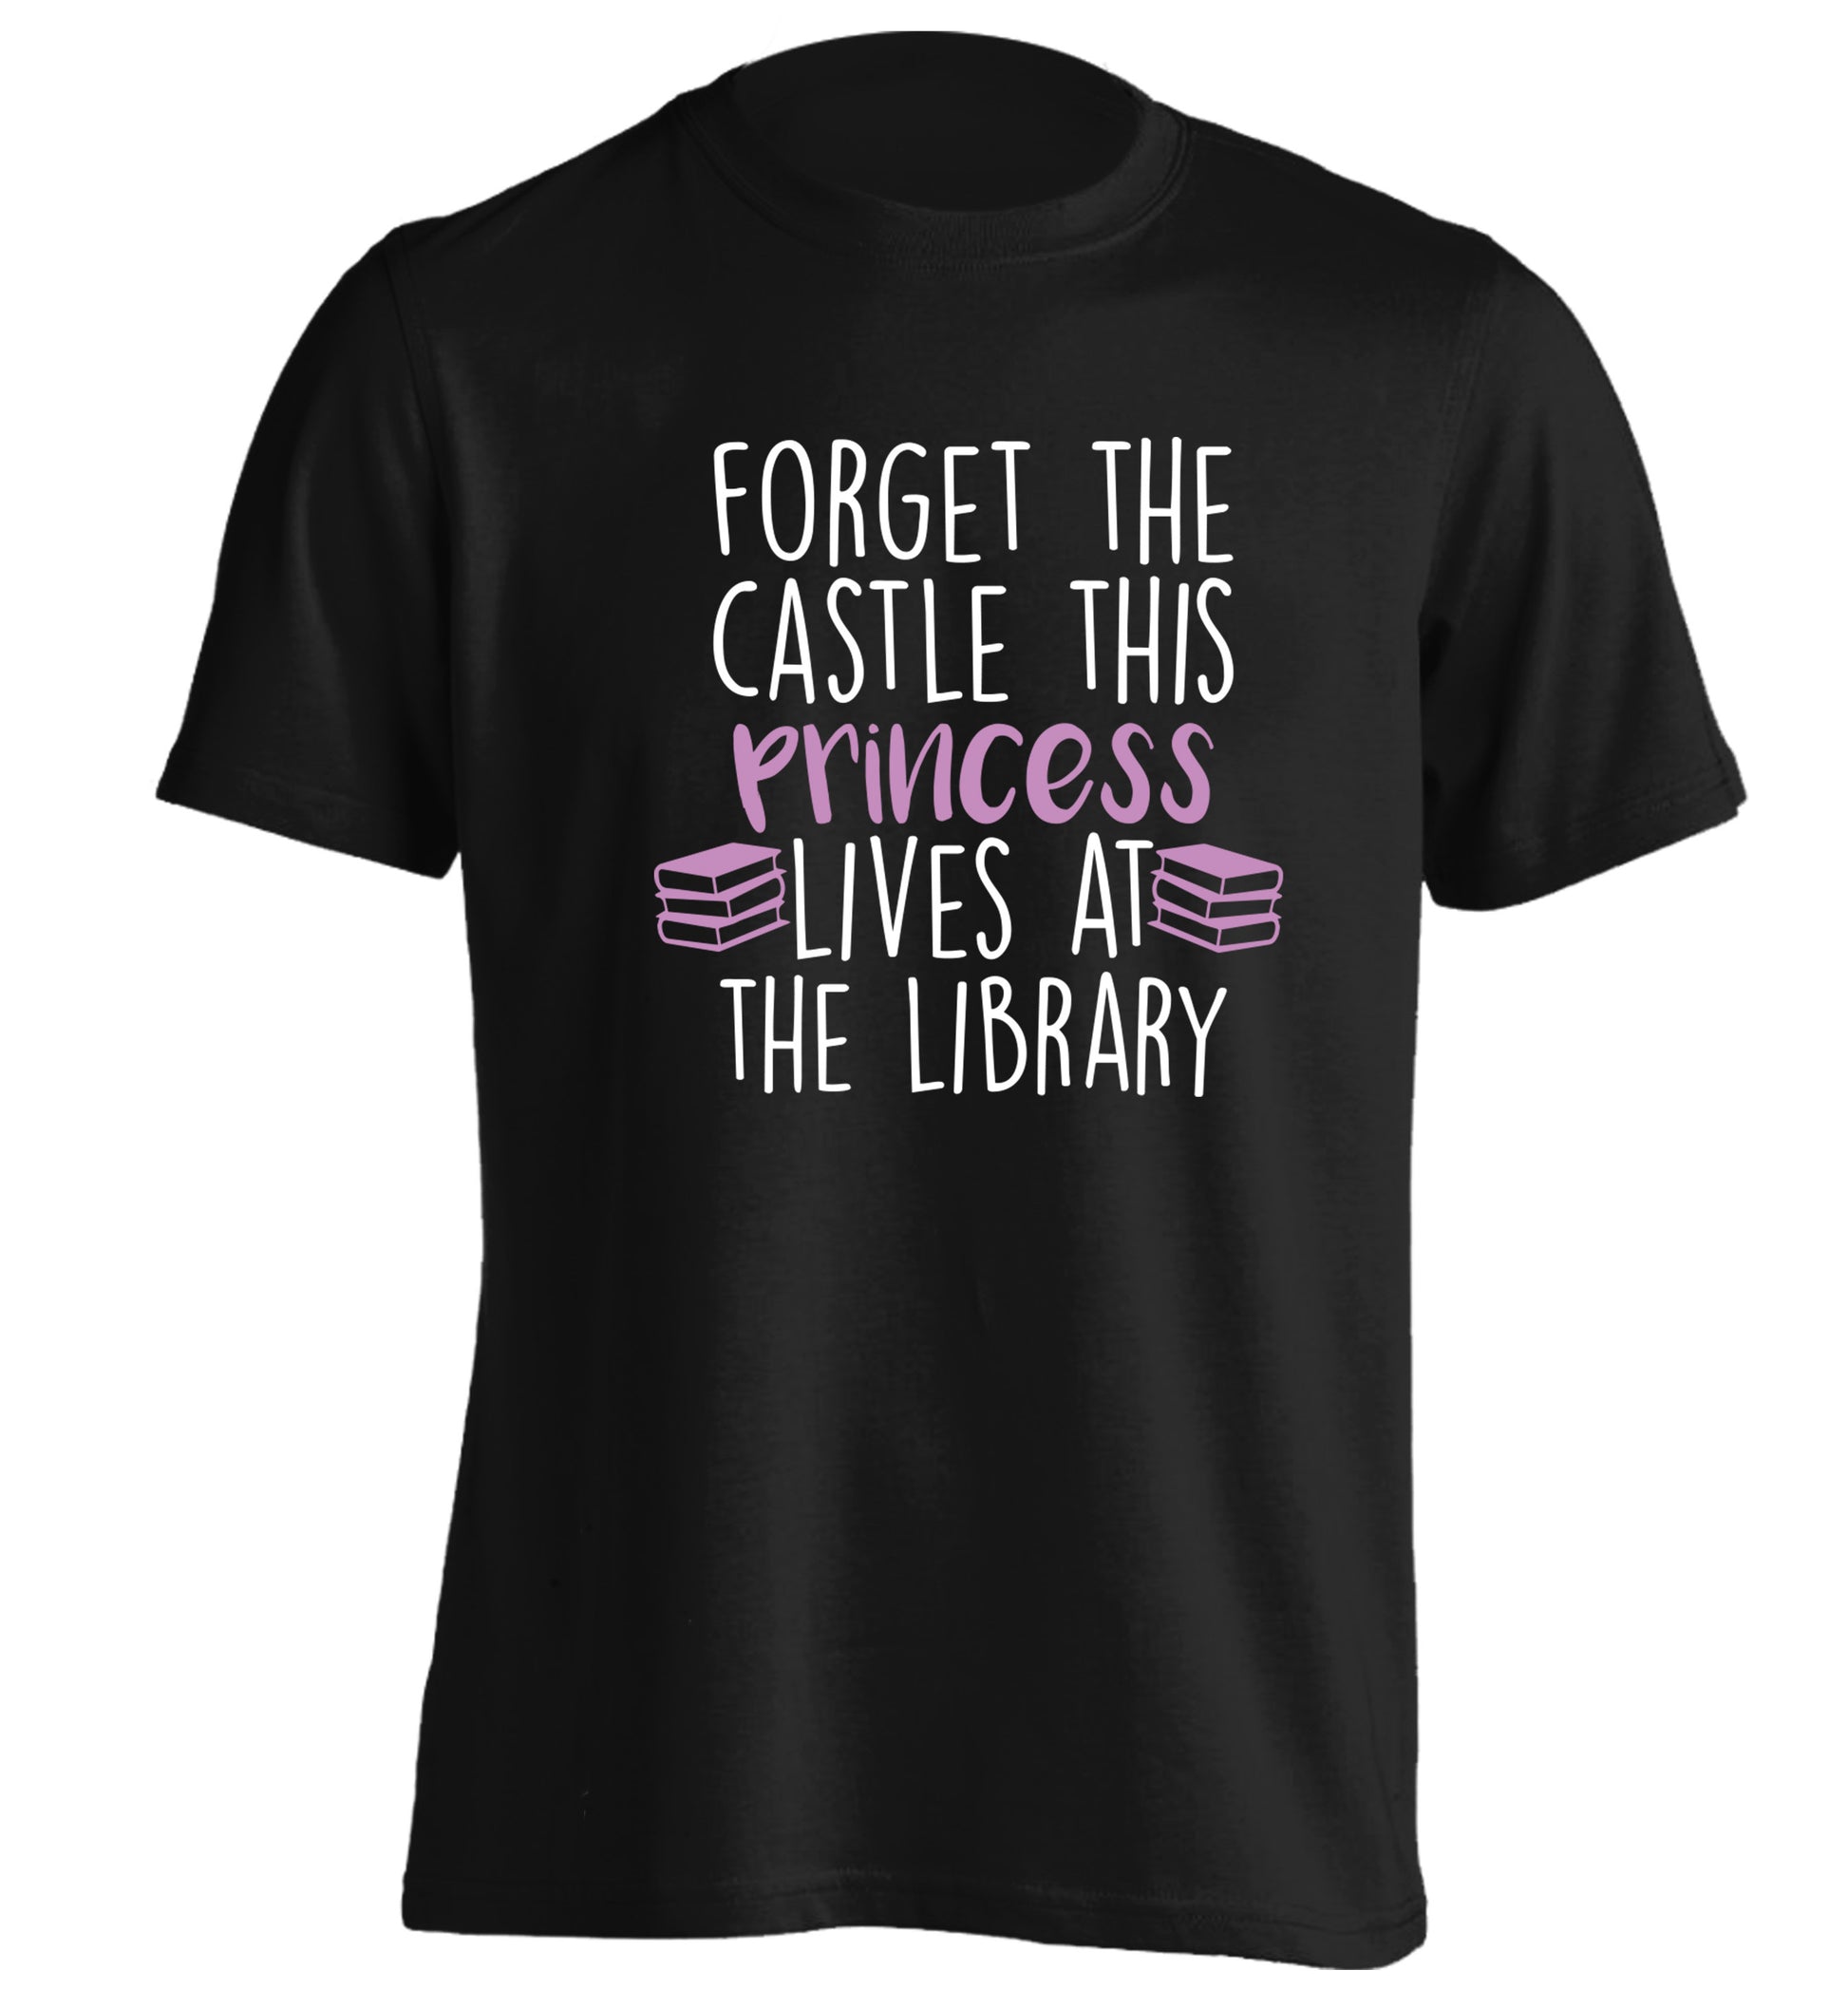 Forget the castle this princess lives at the library adults unisex black Tshirt 2XL